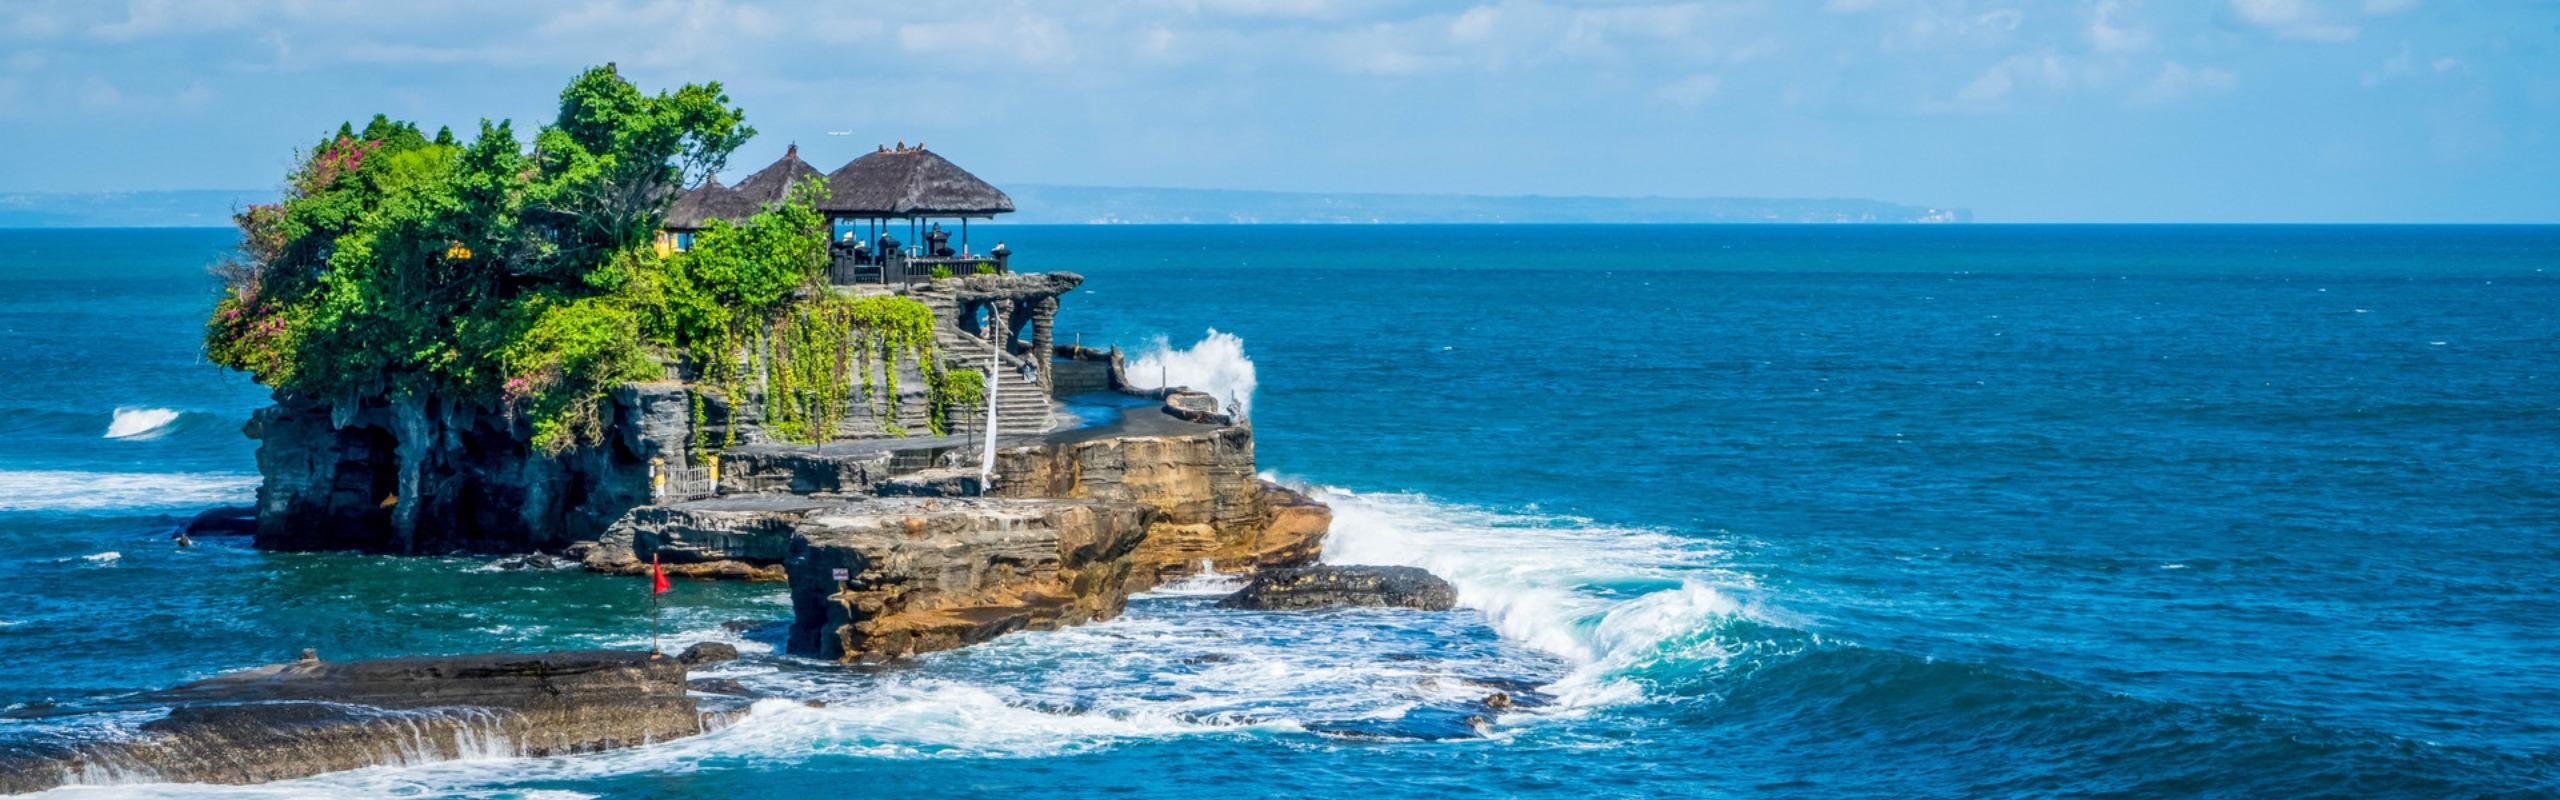 Bali Weather in April: Best Places to Go & Travel Tips